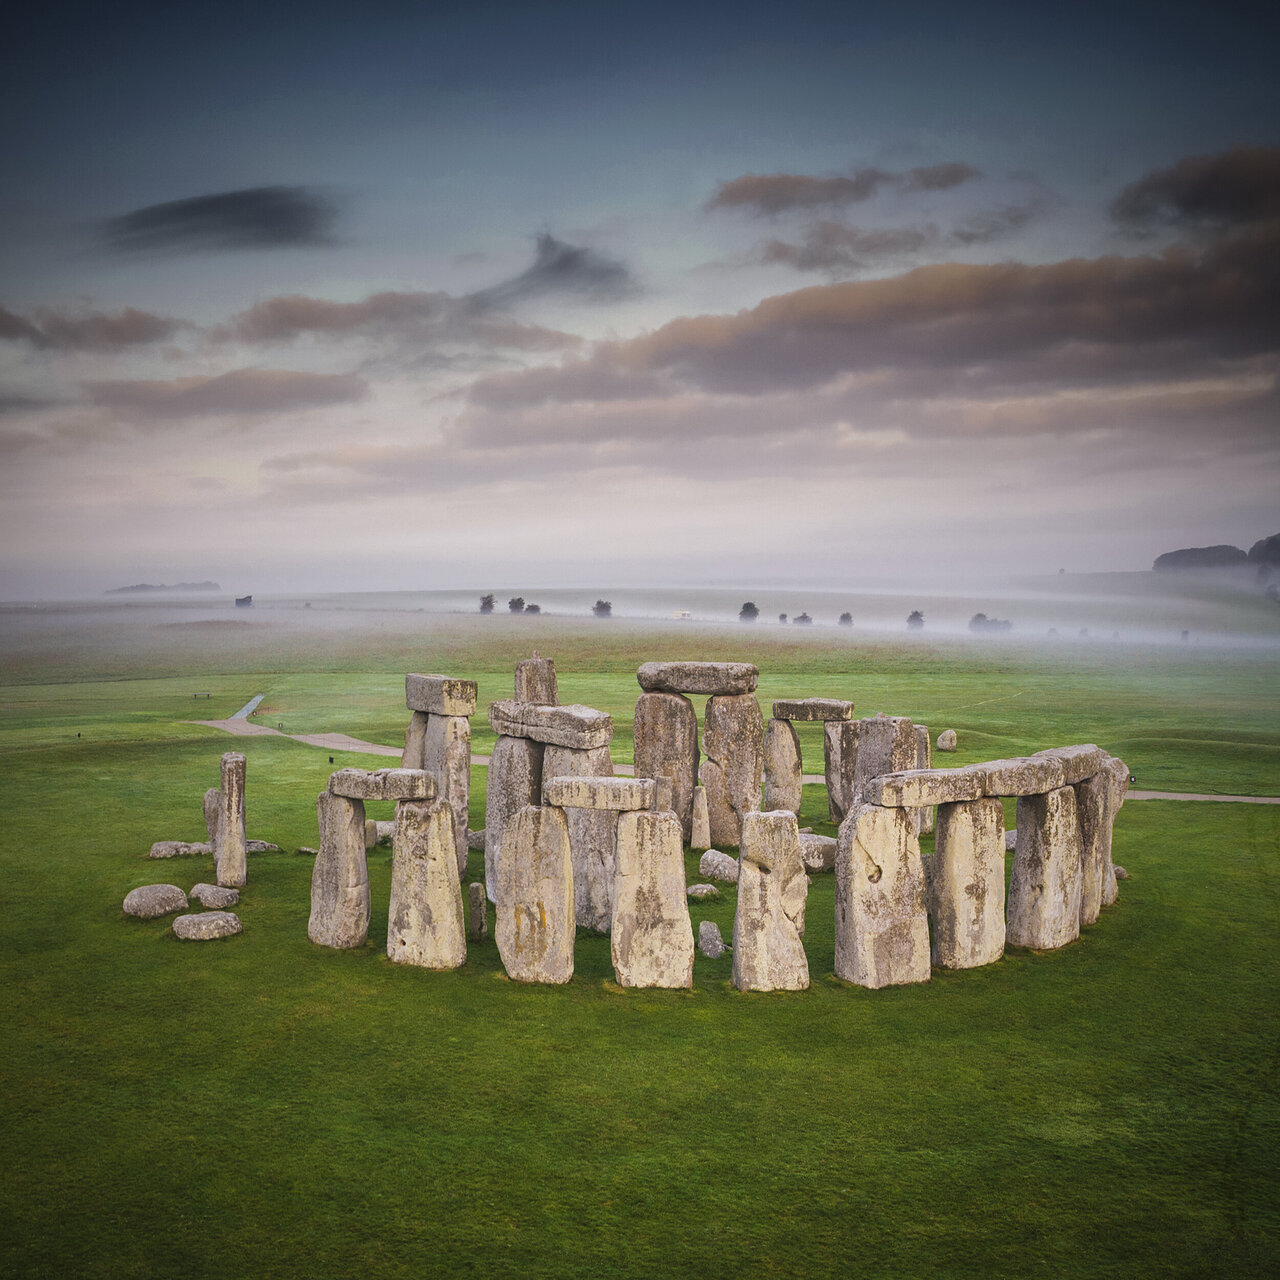 Mystery solved: Scientists trace source of Stonehenge boulders